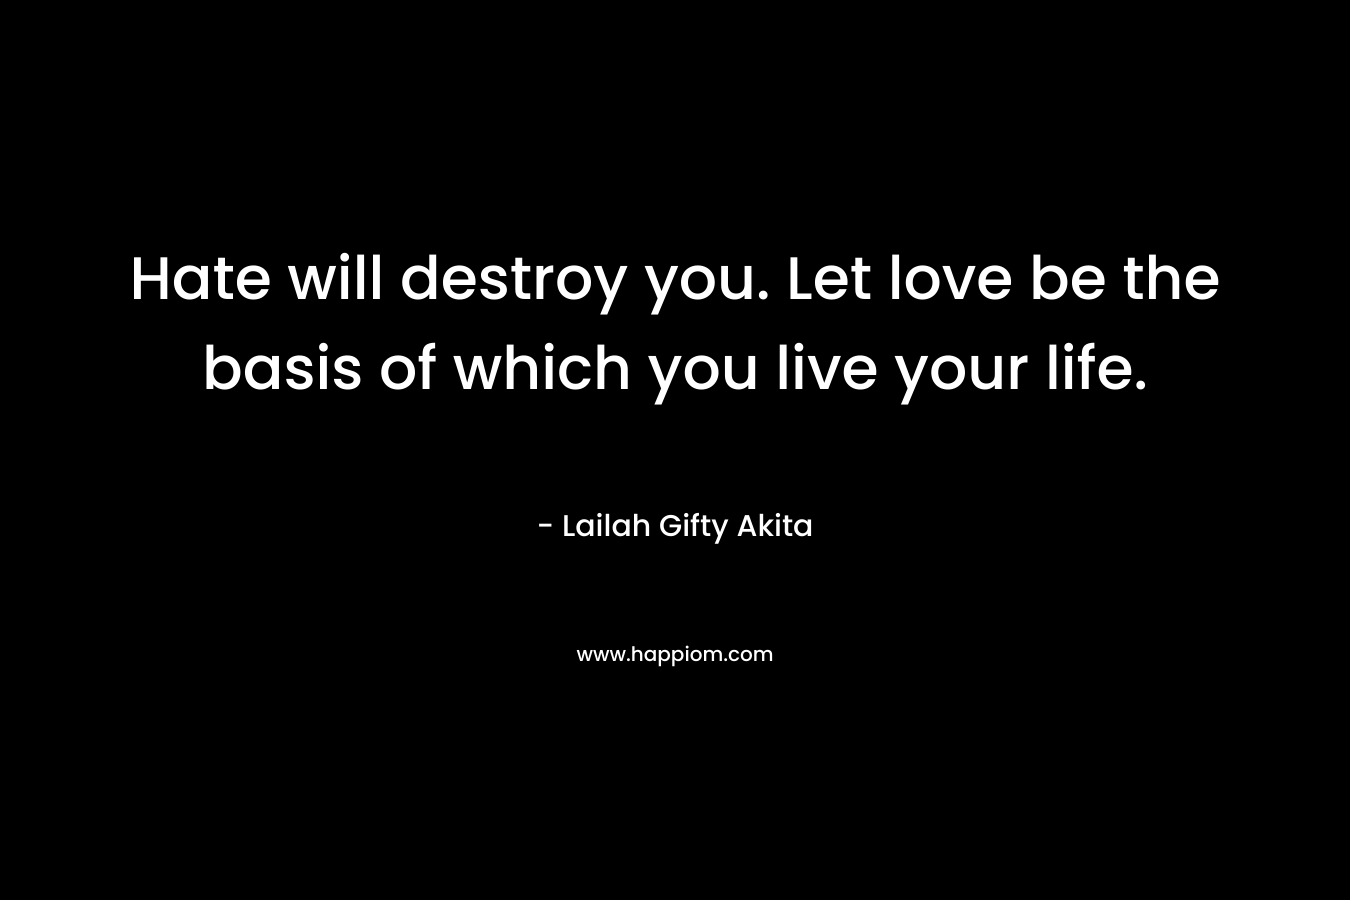 Hate will destroy you. Let love be the basis of which you live your life. – Lailah Gifty Akita